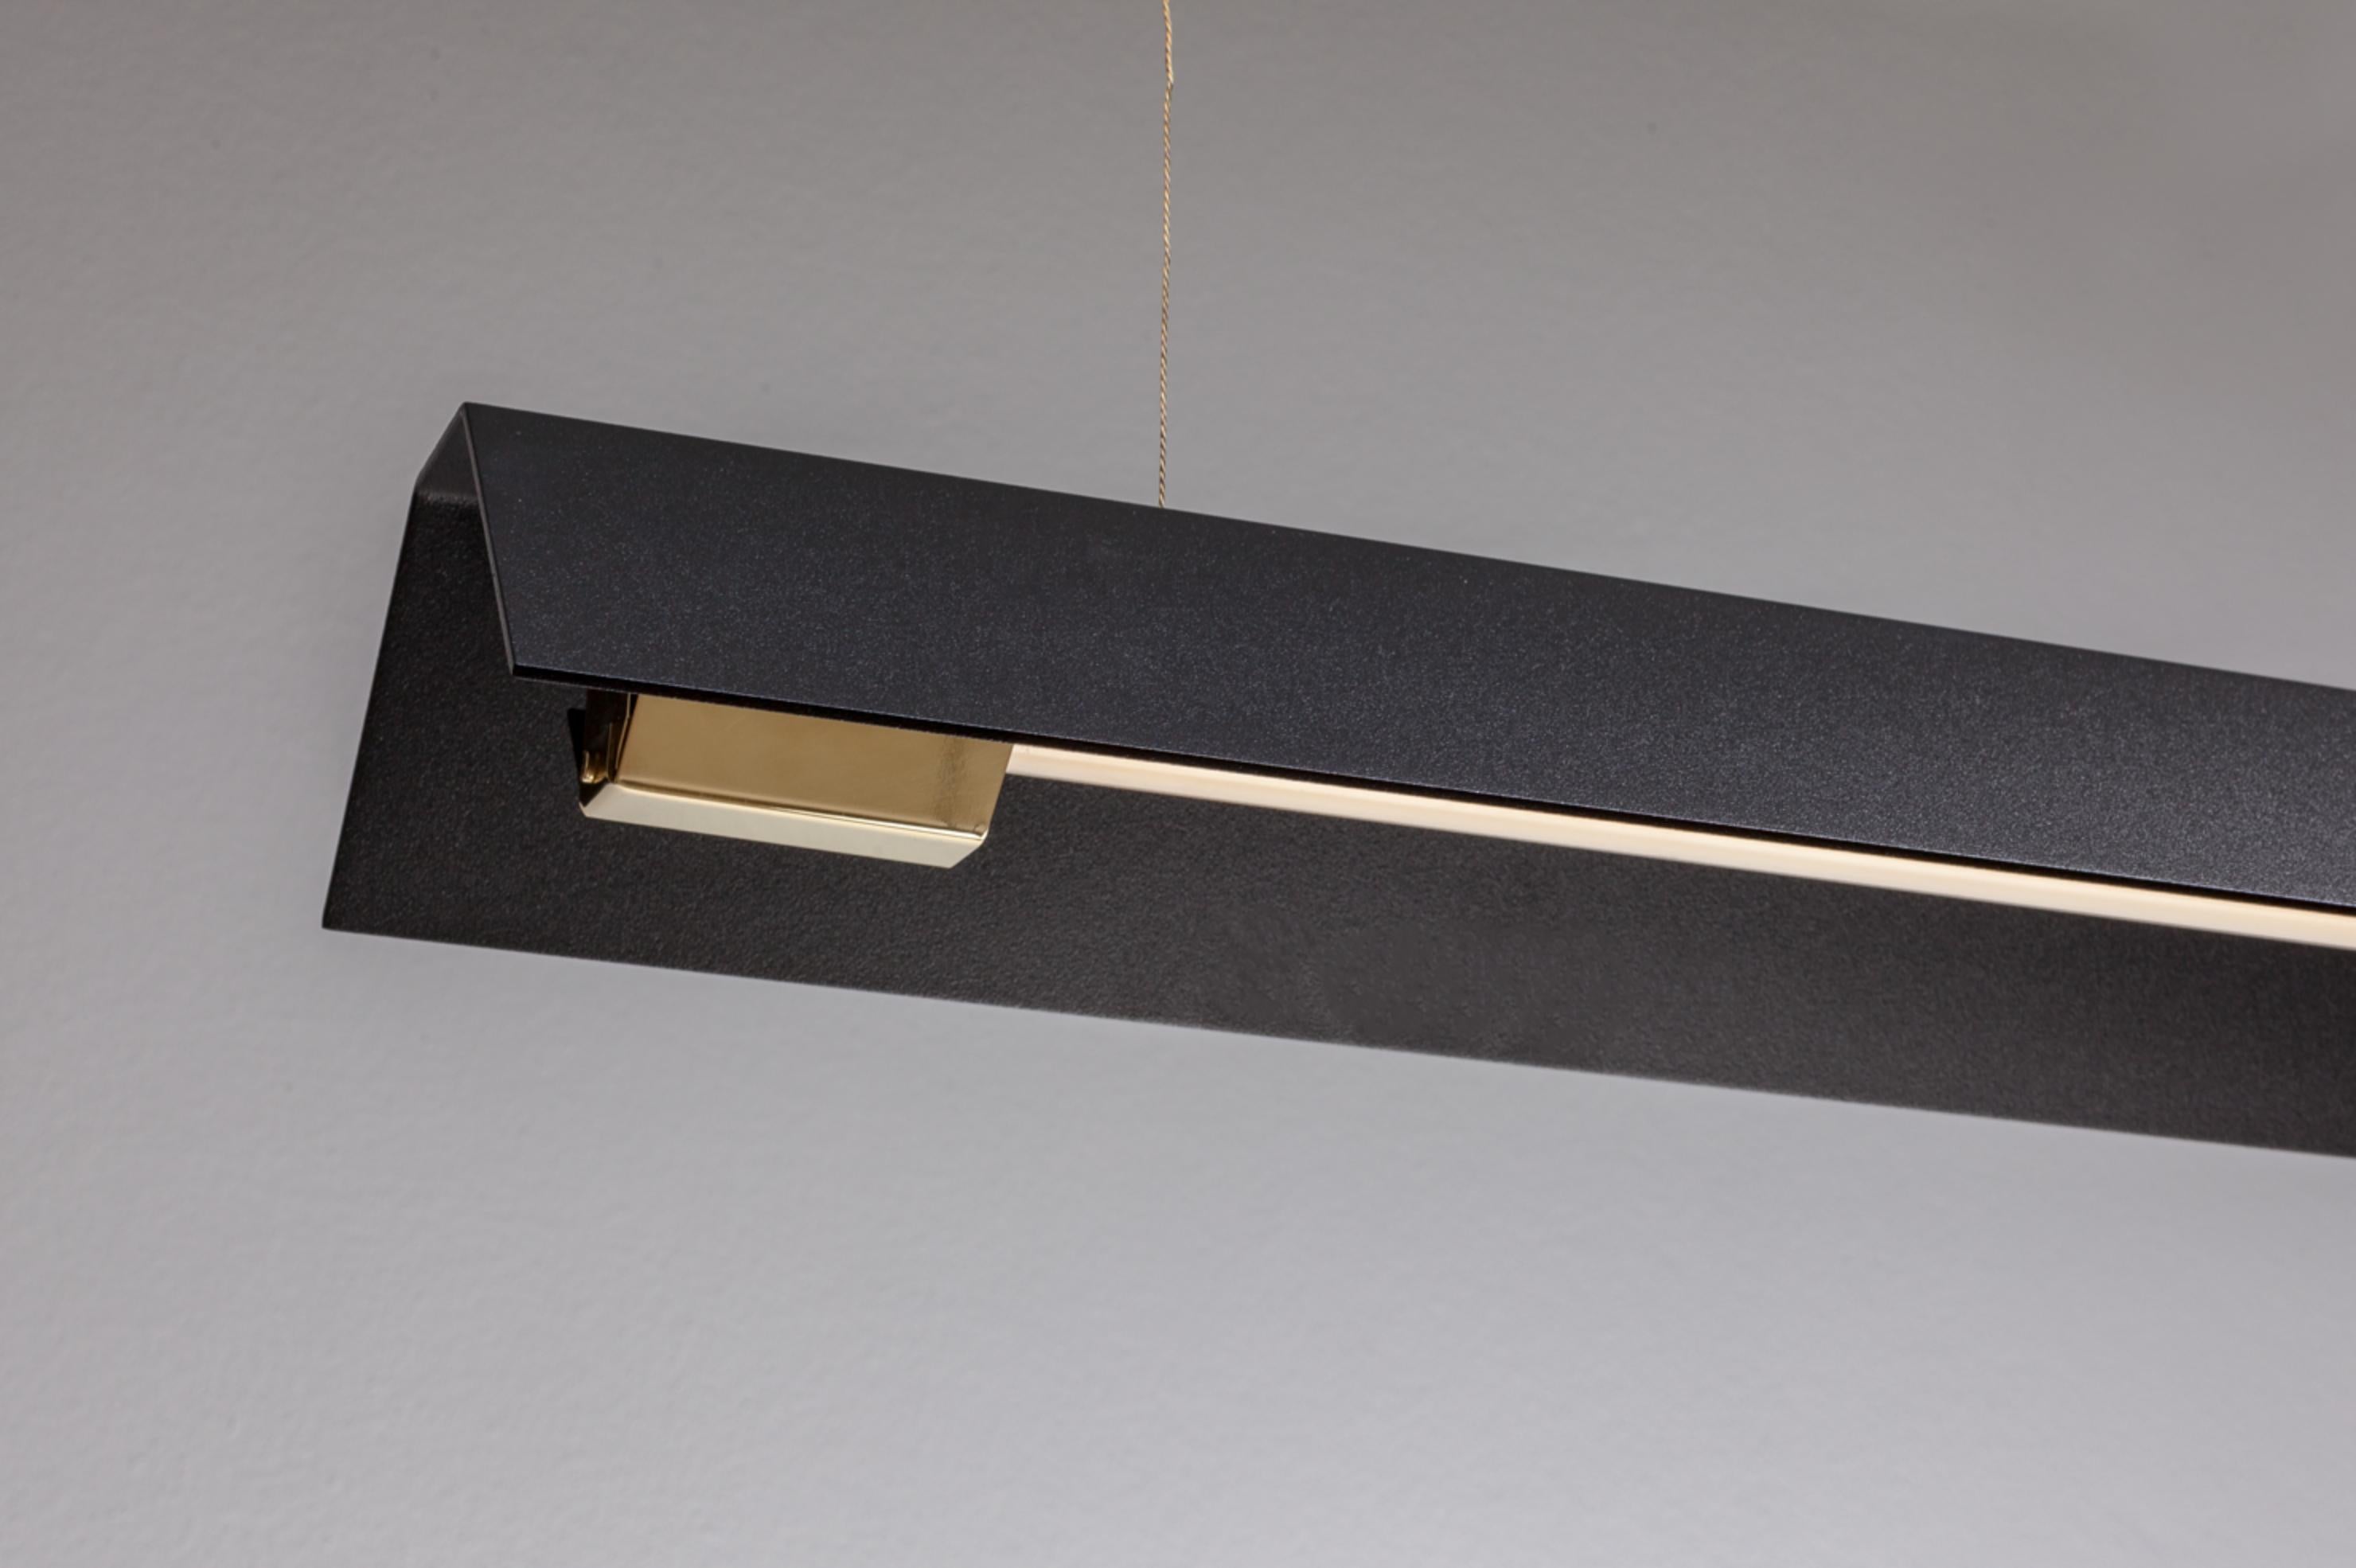 Extra large misalliance ex jet black suspended light by Lexavala.
Dimensions: D 16 x W 160 x H 8 cm.
Materials: powder coated shade with details made of brass or stainless steel.

There are two lenghts of socket covers, extending over the LED.